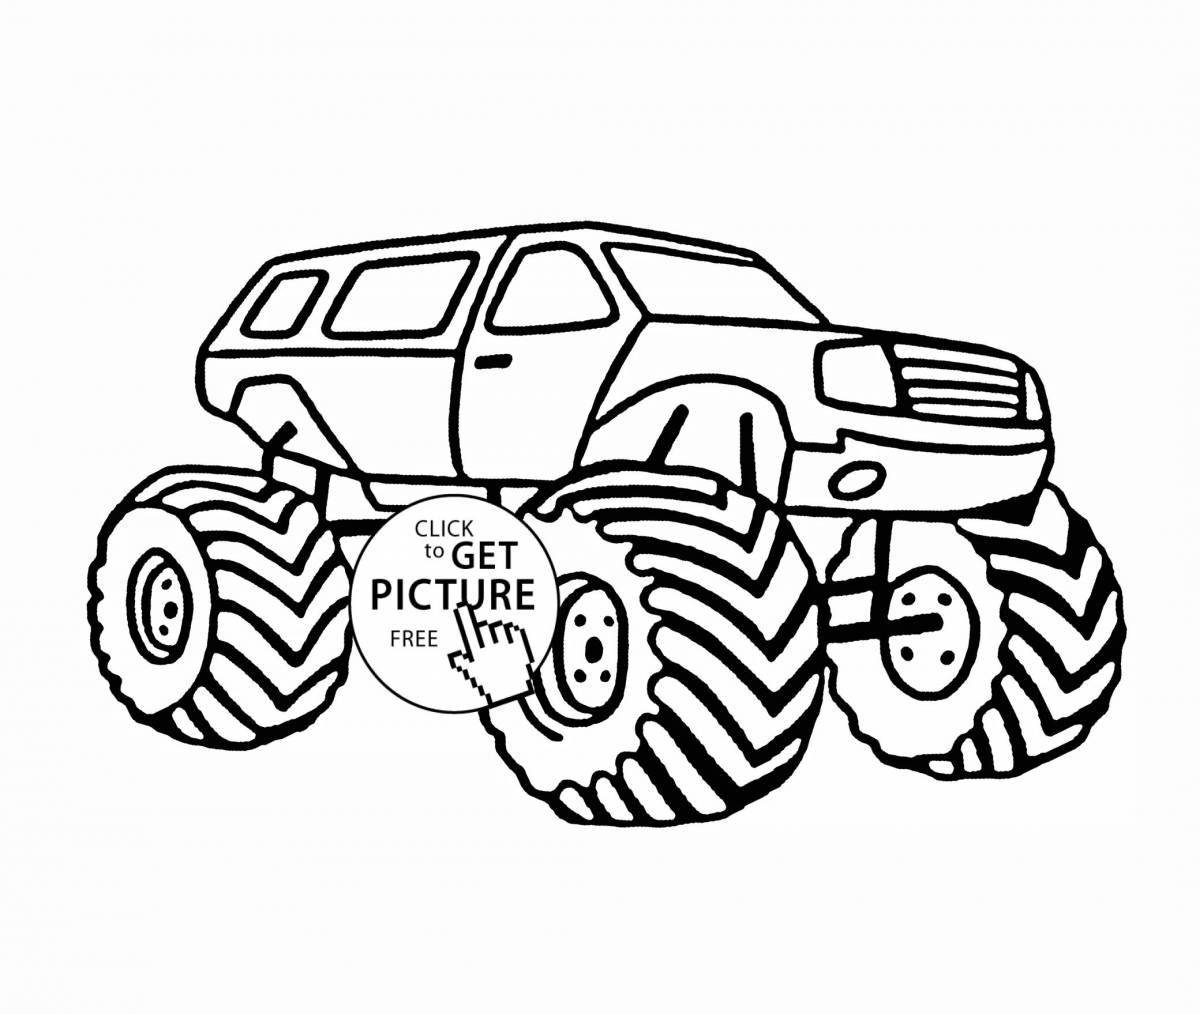 Attractive police monster truck coloring book